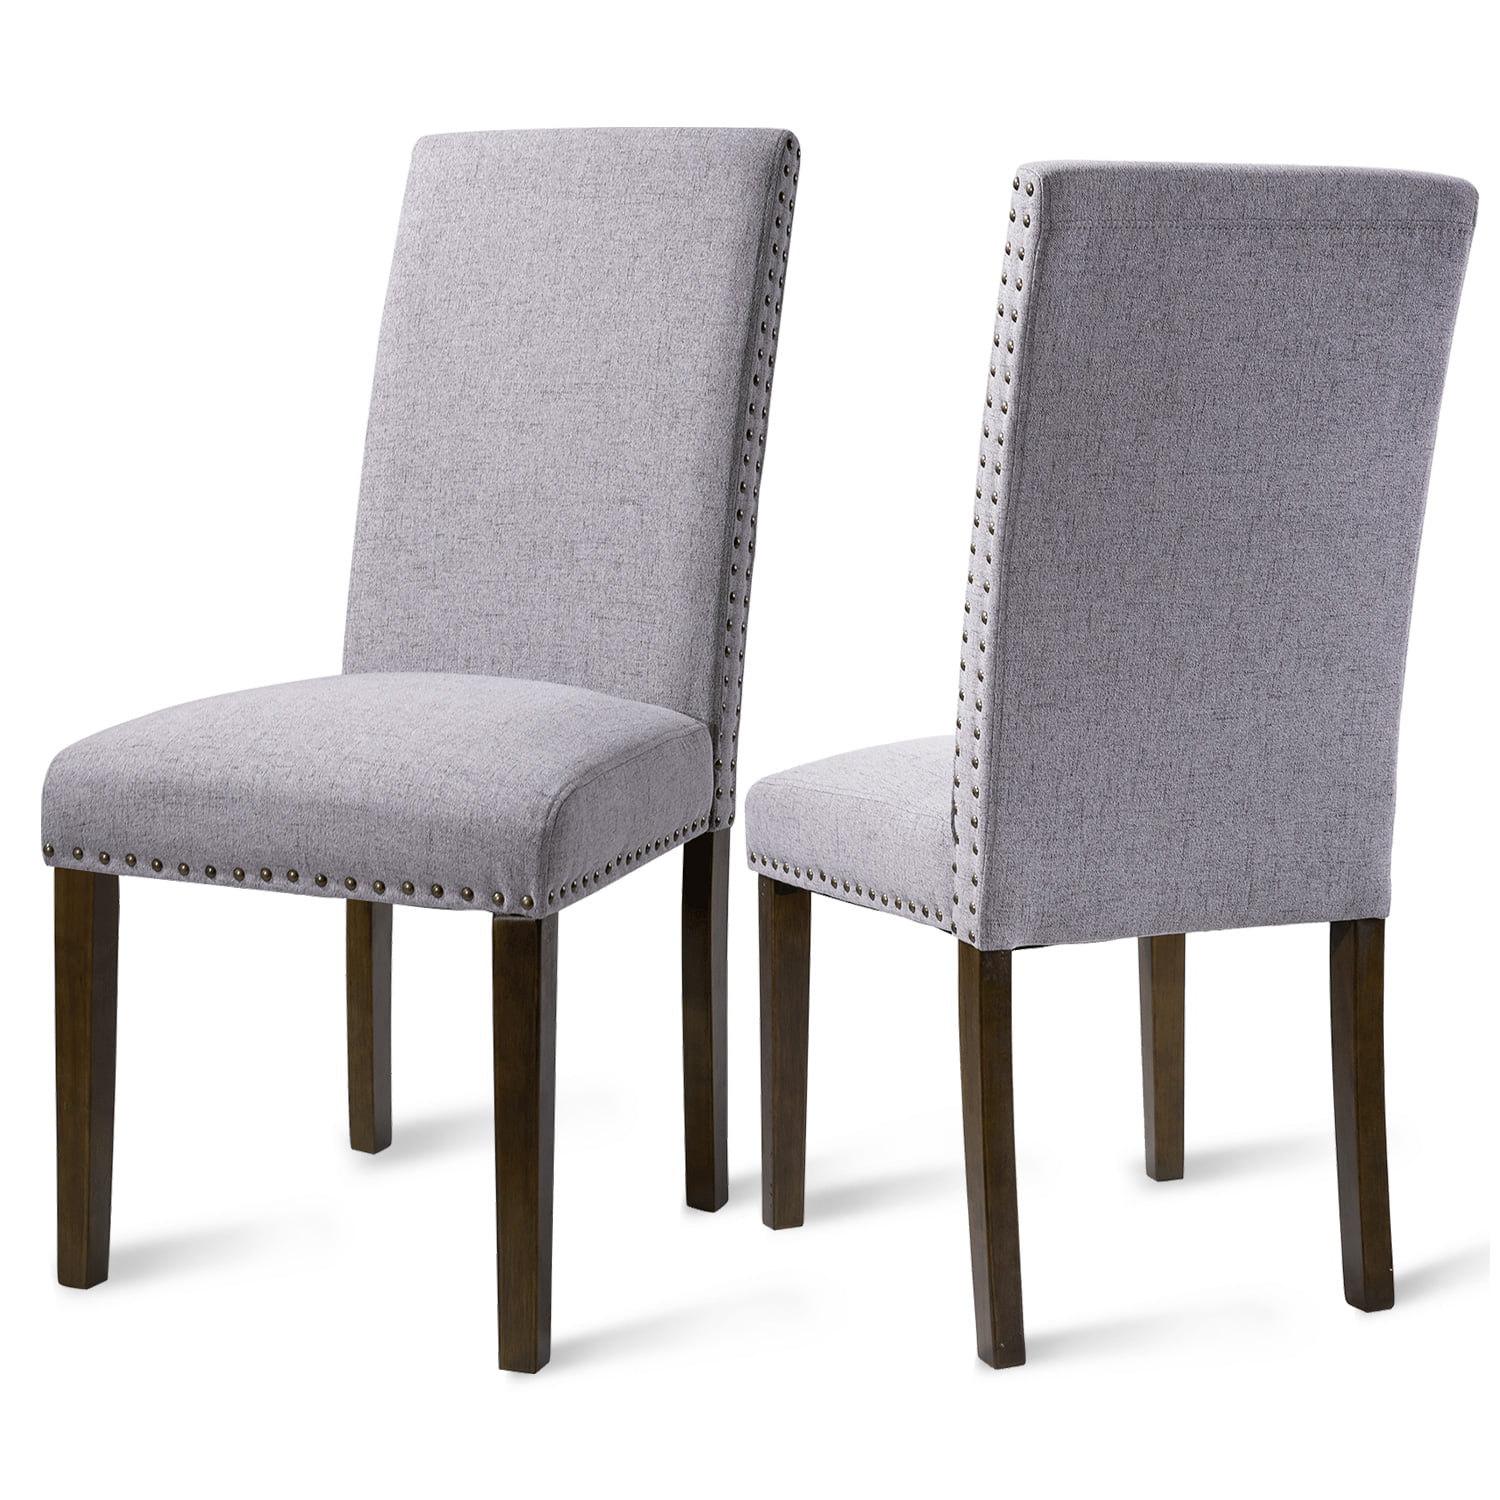 Set of 2 Gray Tufted Dining Chairs, Upholstered High Back Padded Dining